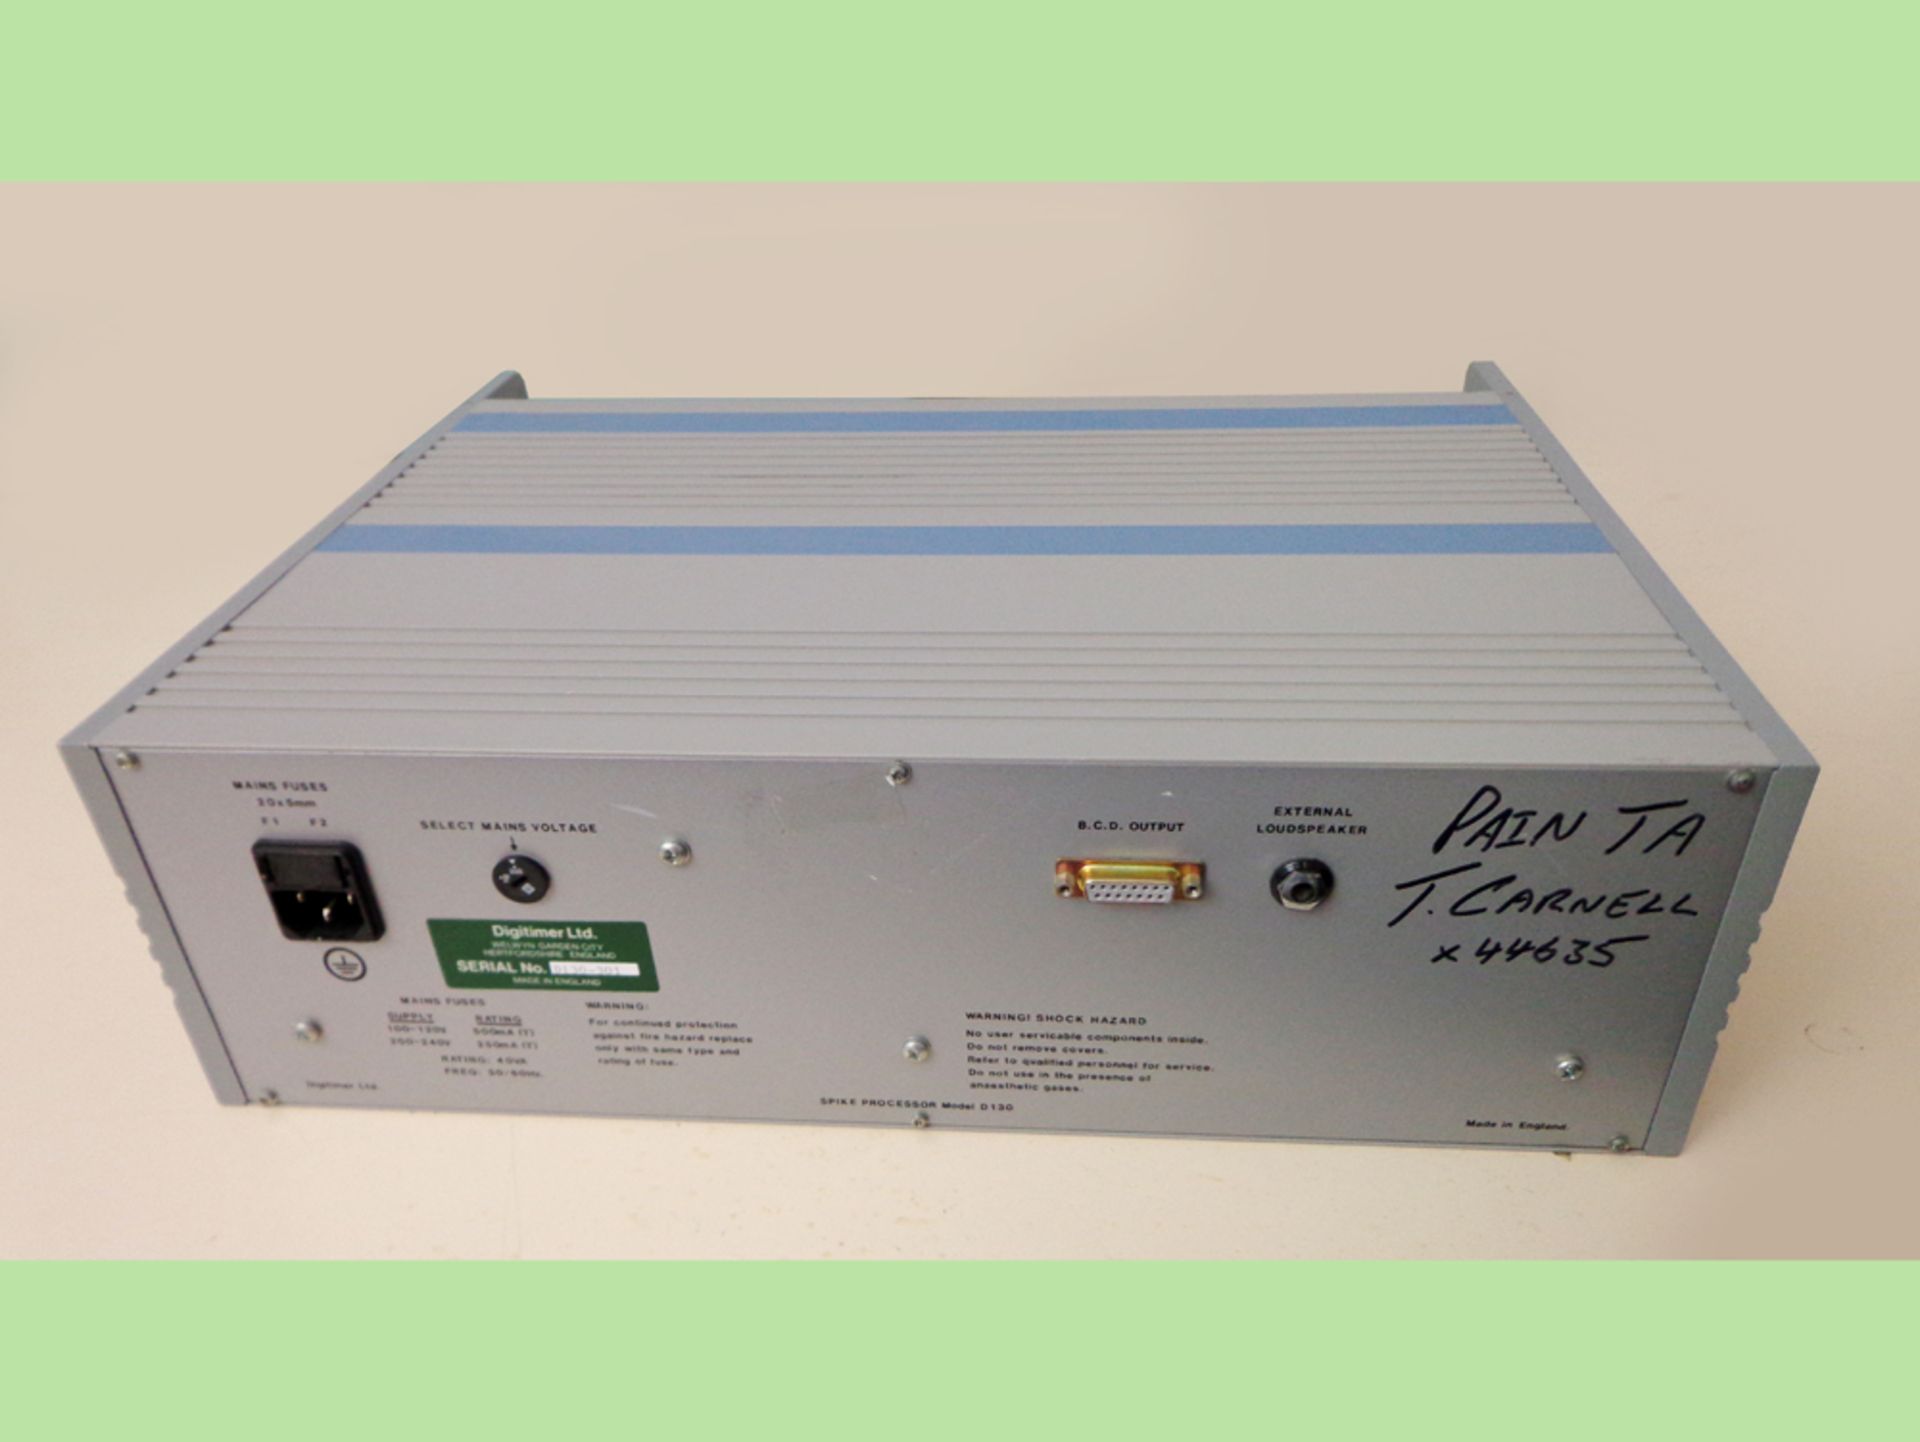 Digitimer D130 Spike Processor Monitor/Counter, S/N D130-301 - Image 5 of 8